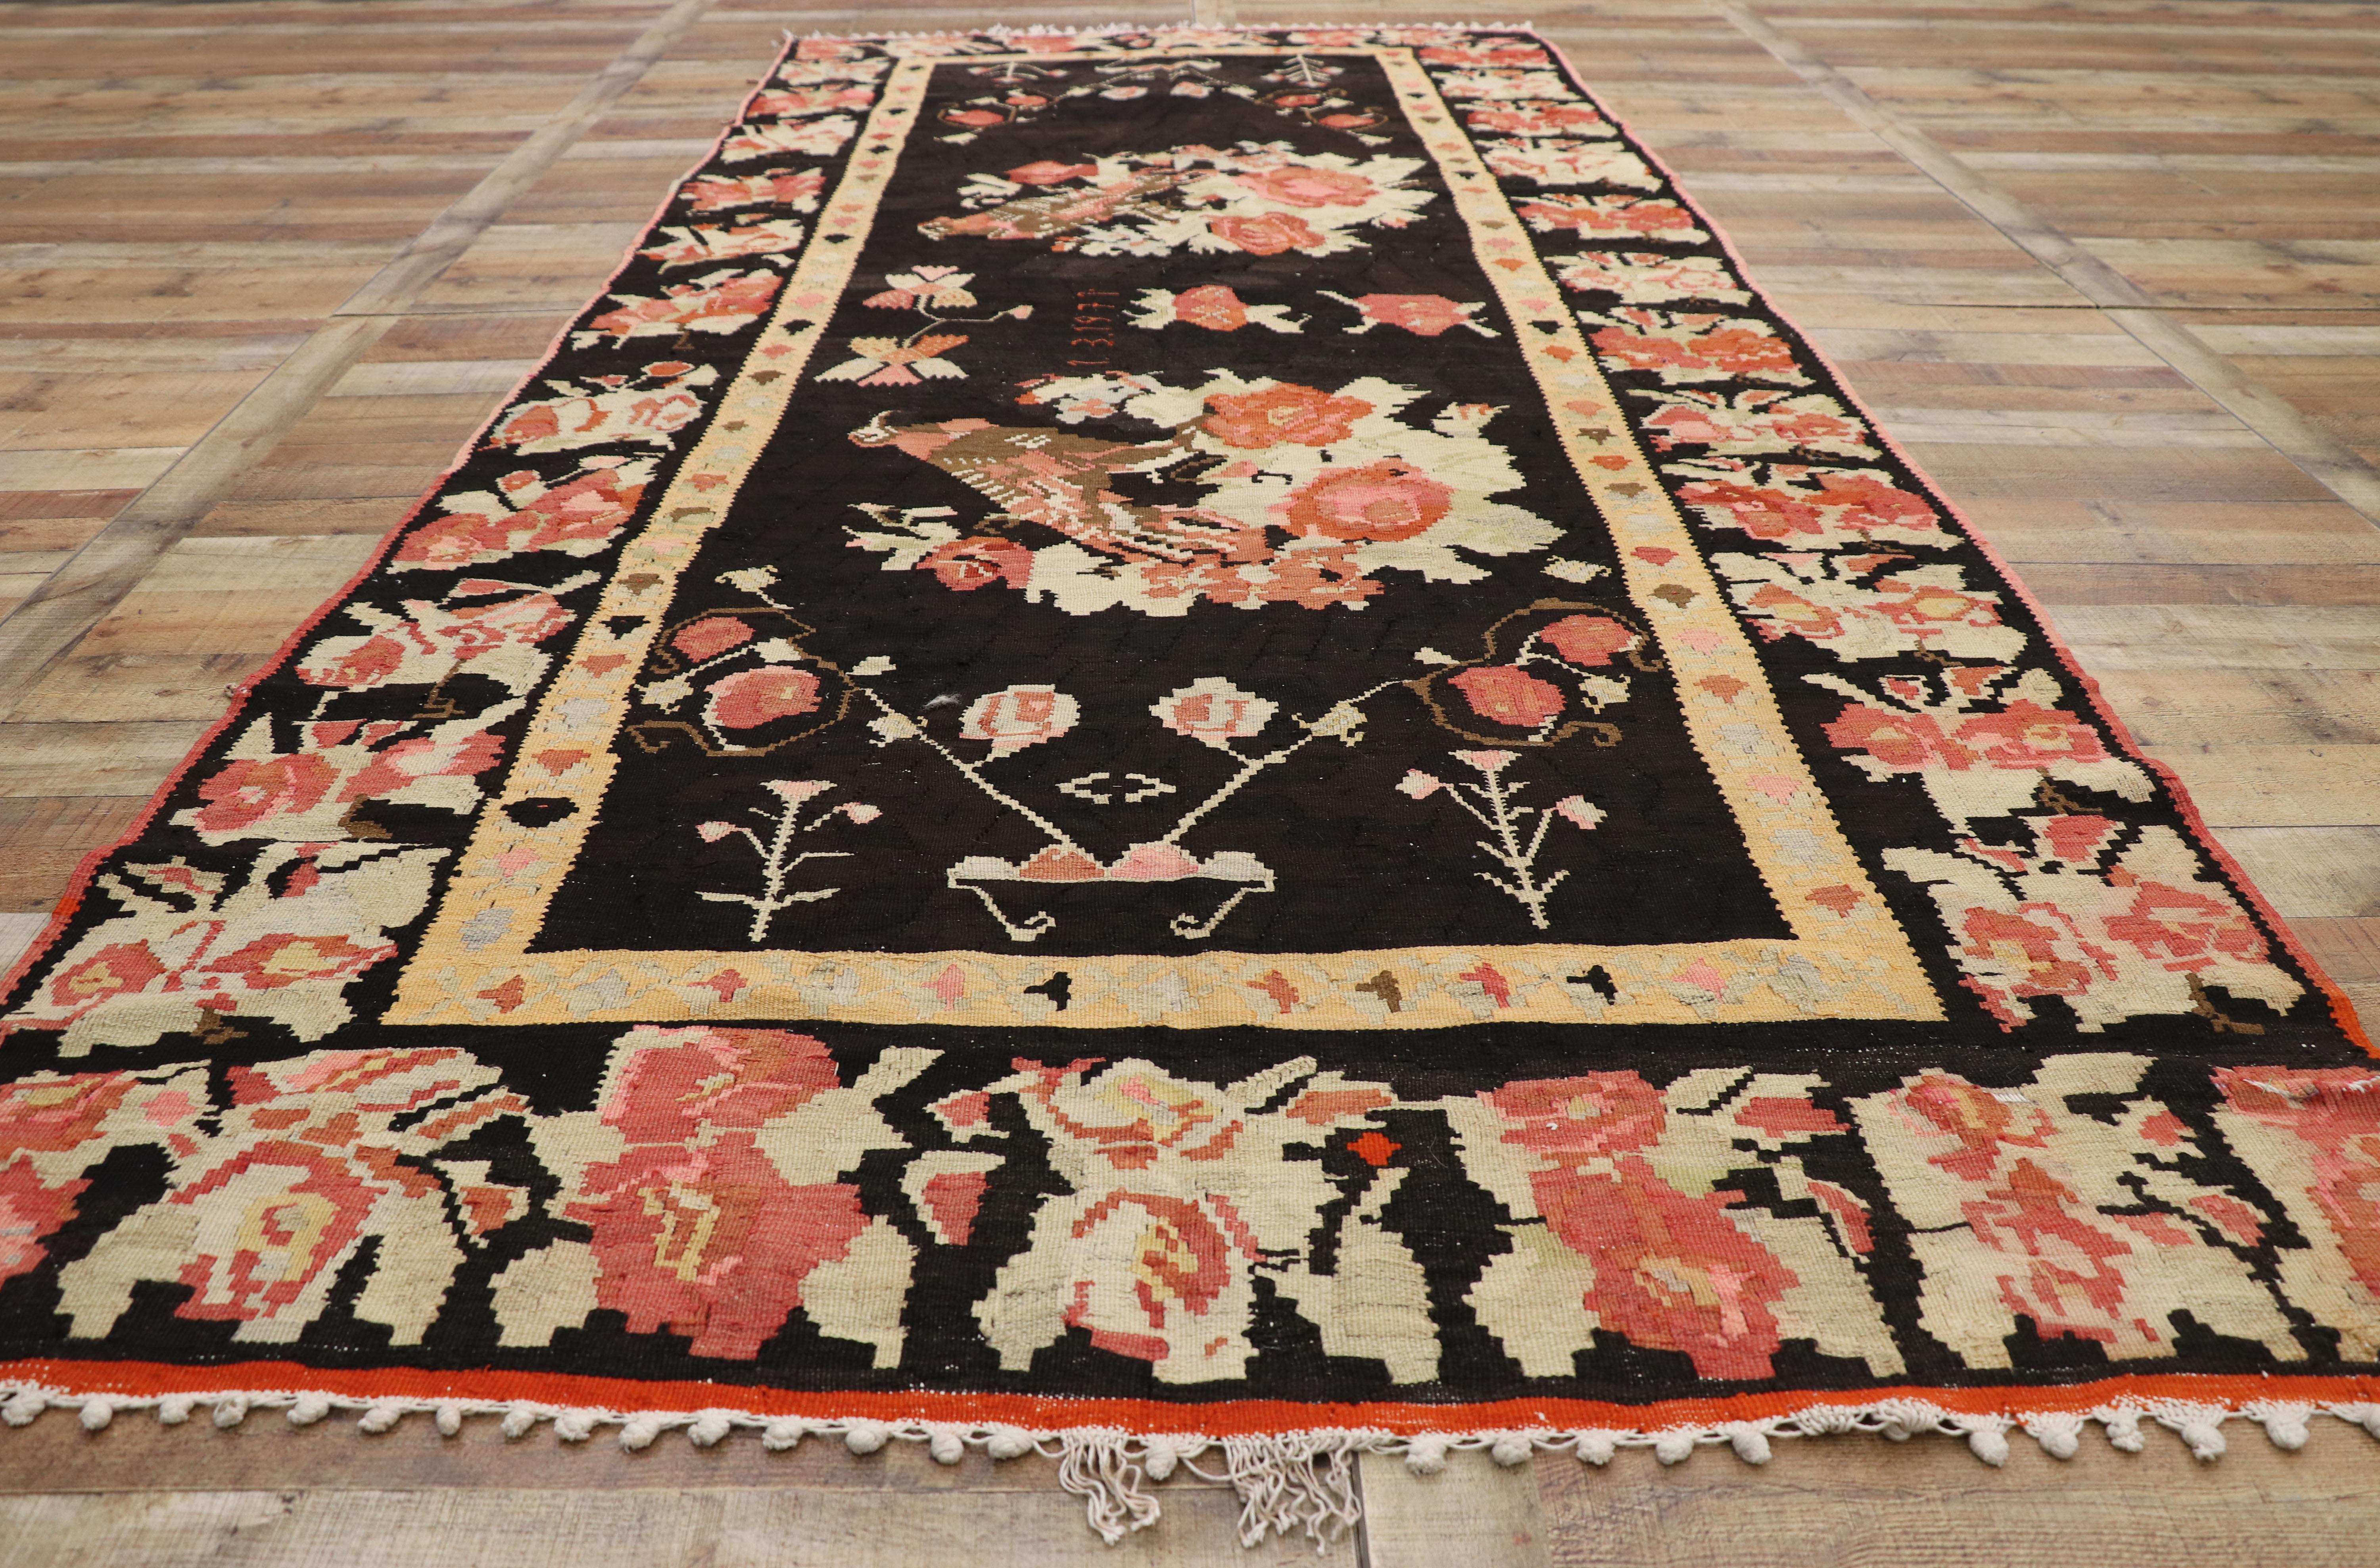 20th Century Vintage Floral Turkish Kilim Rug with Chintz Style and Bessarabian Rose Design  For Sale